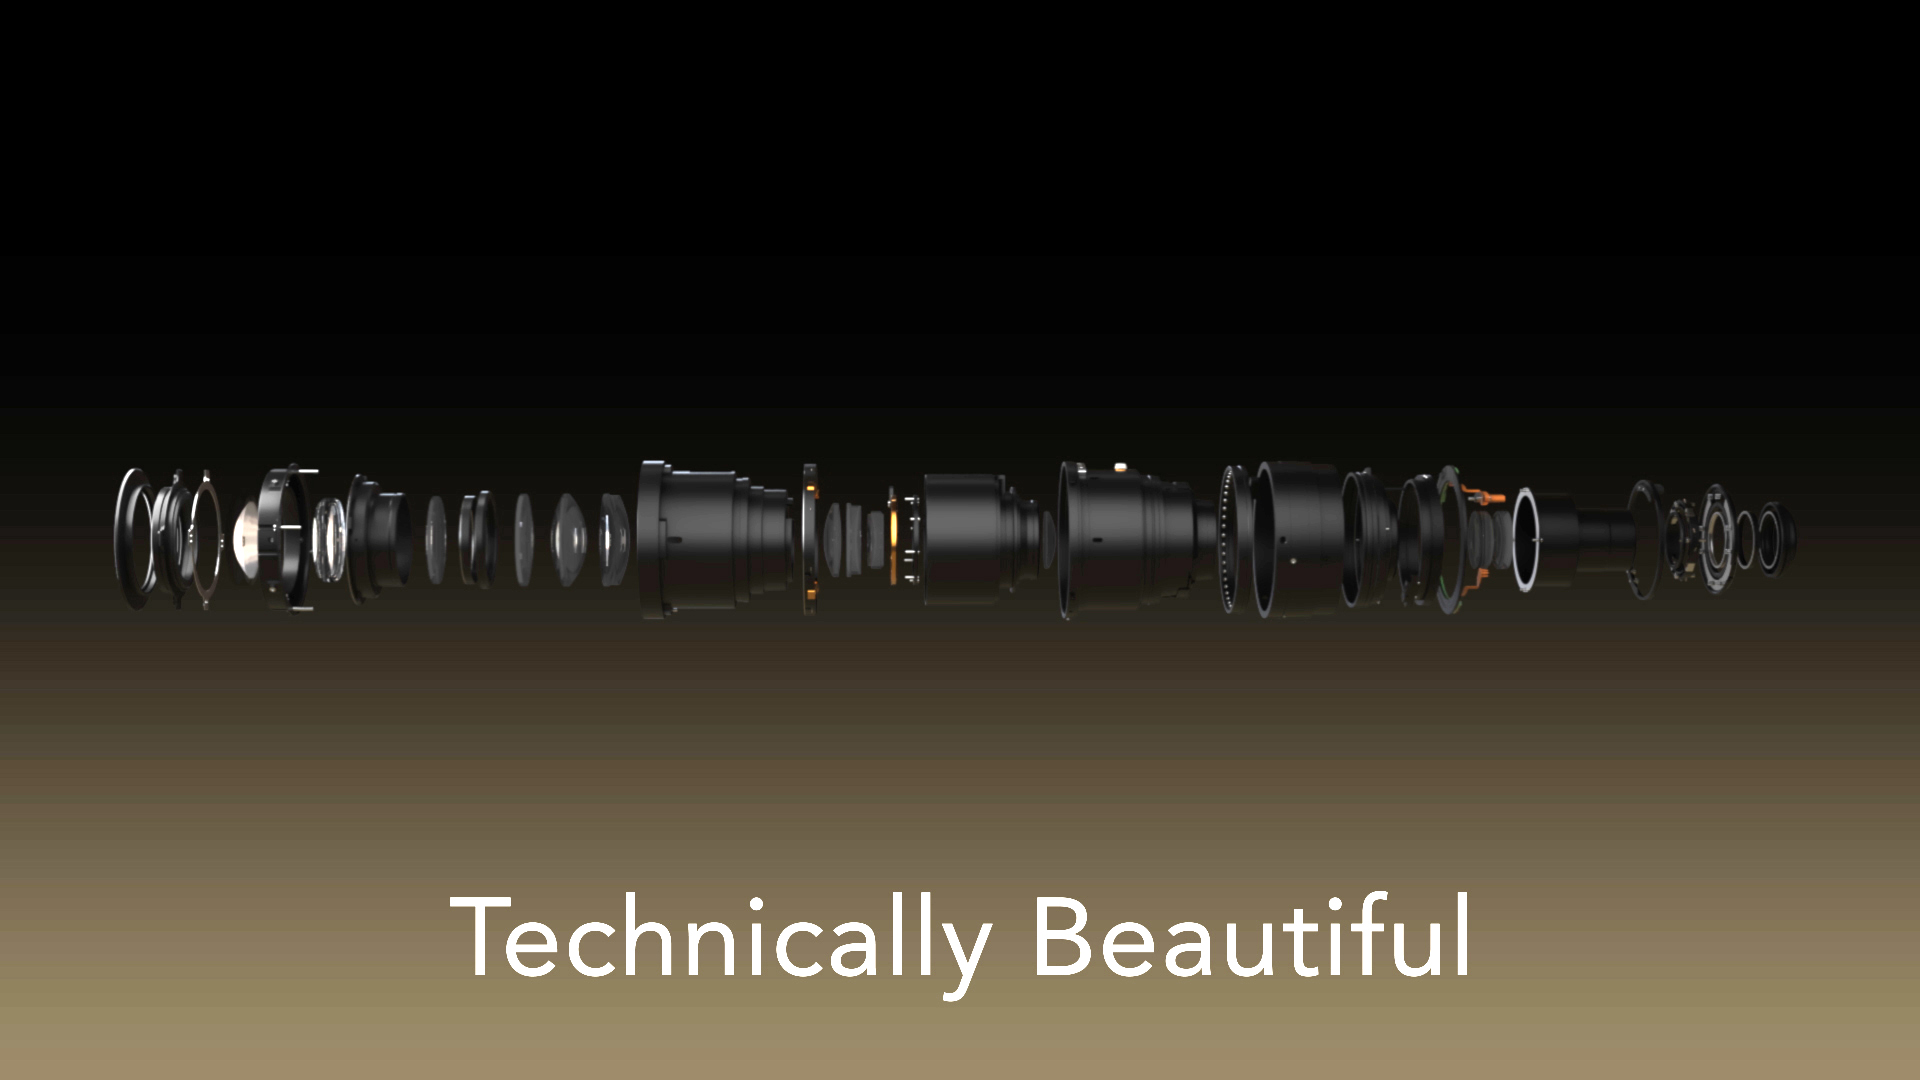 A deconstructed Cooke camera lense spear across the screen to showcase each different component, with the text 'Technically Beautiful'